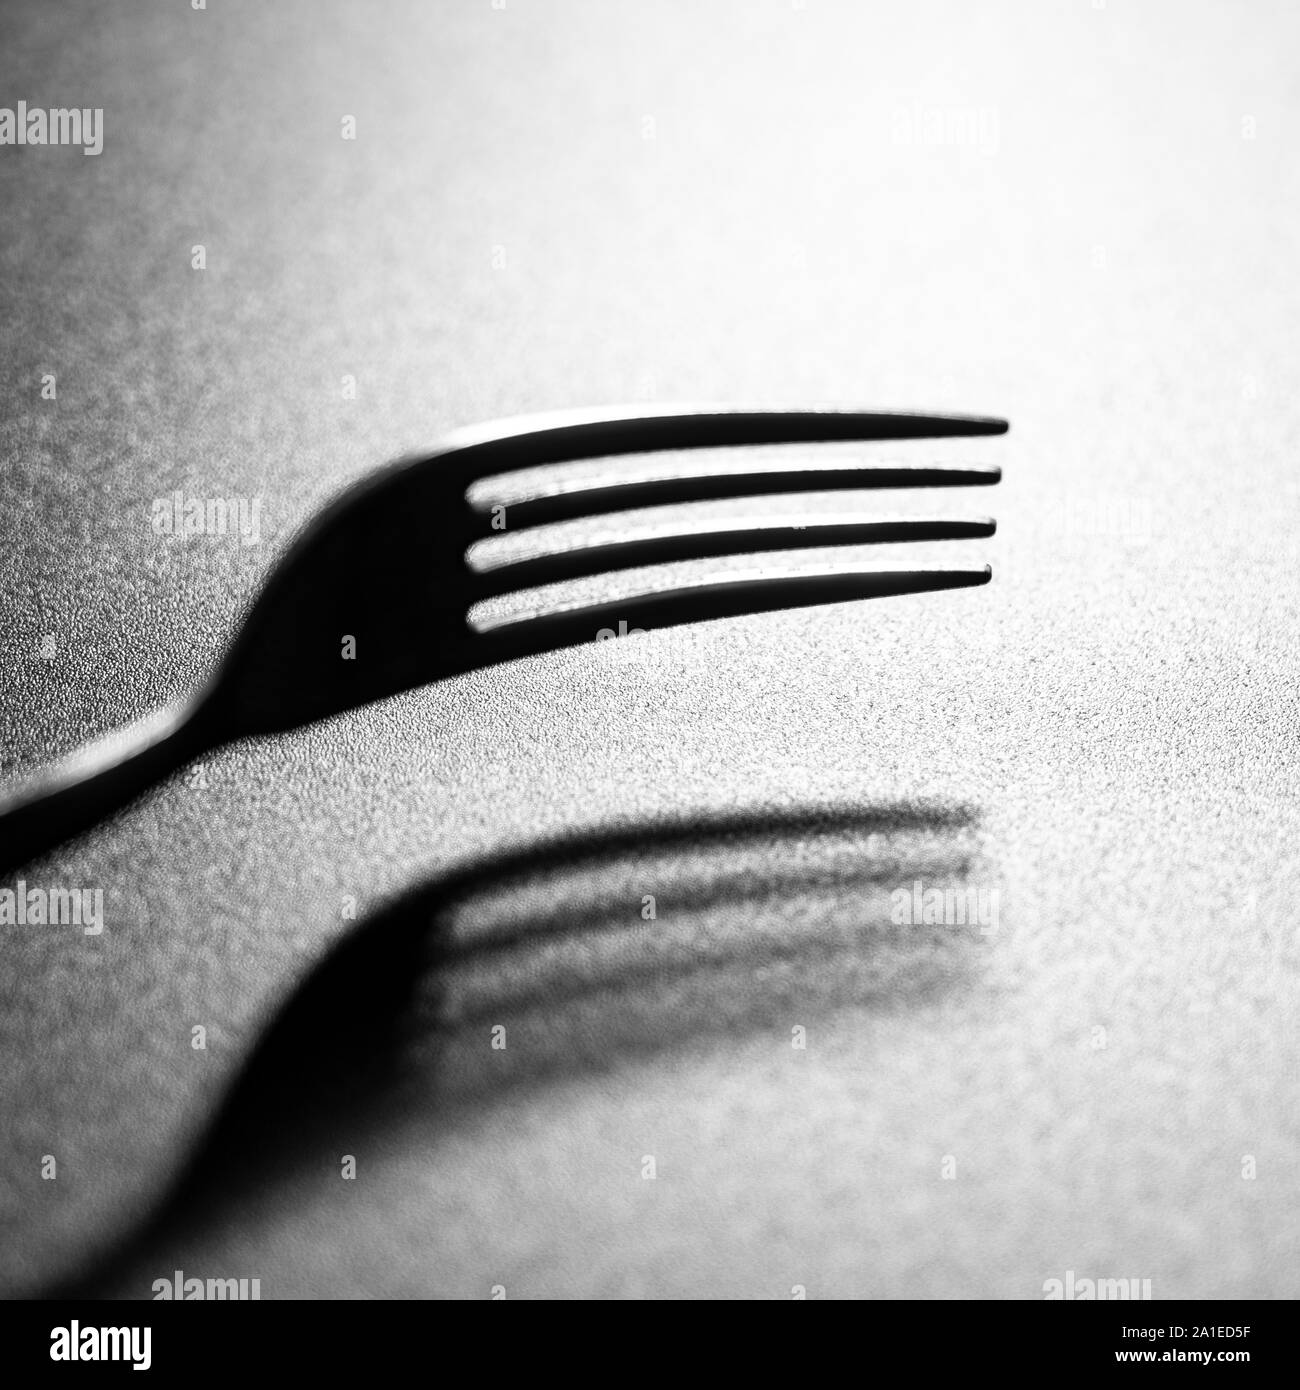 the shadow of a fork on a black surface Stock Photo